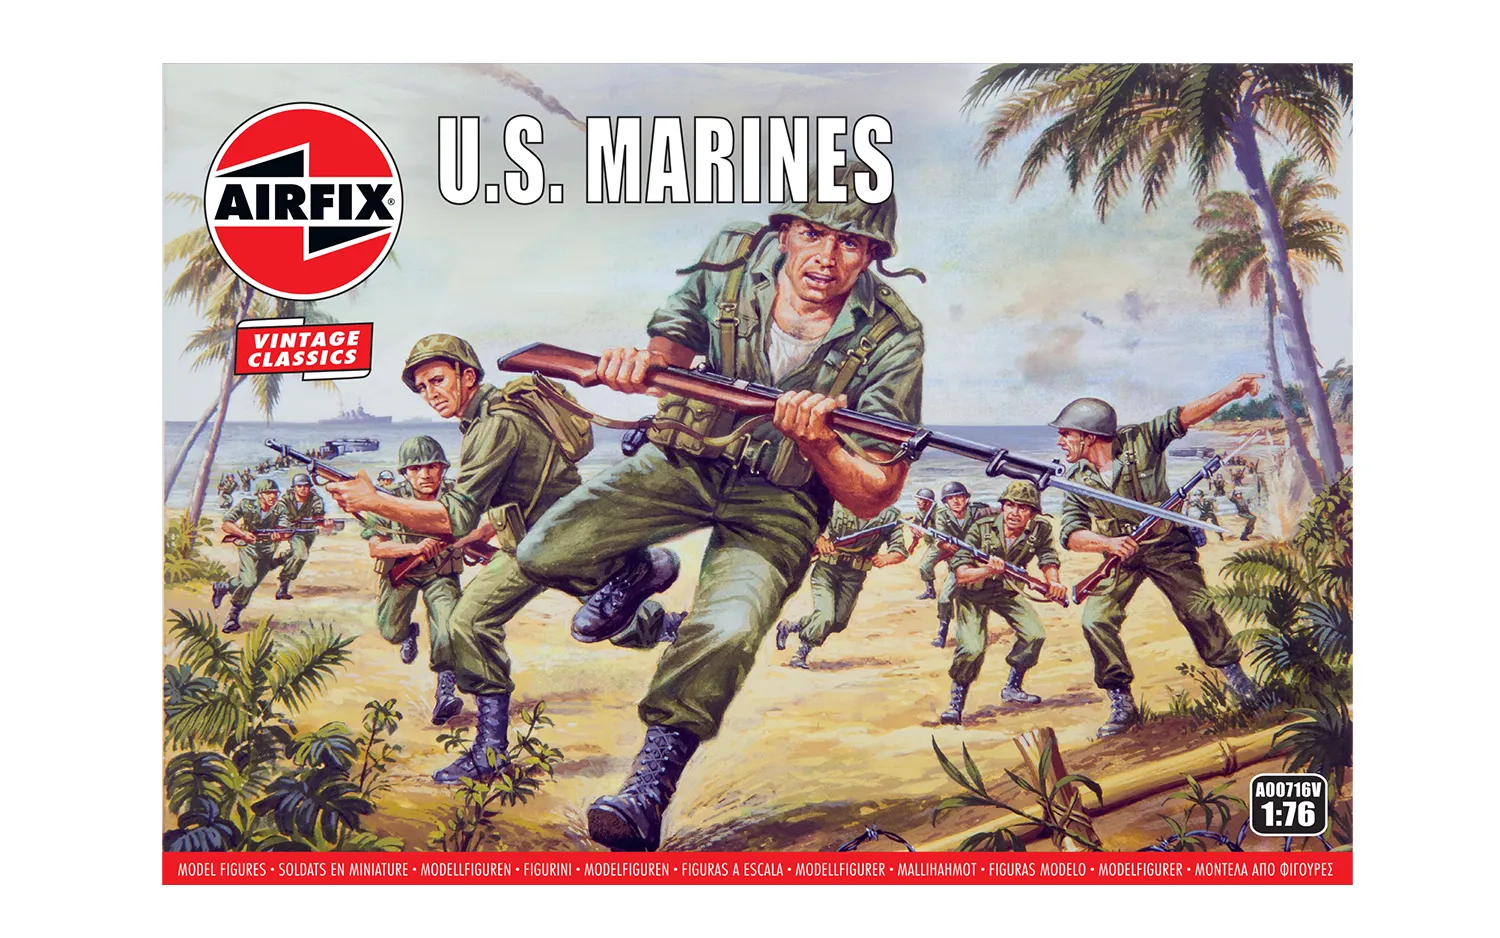 A00716 NEW Airfix WWII U.S Marines Scale 1:72 